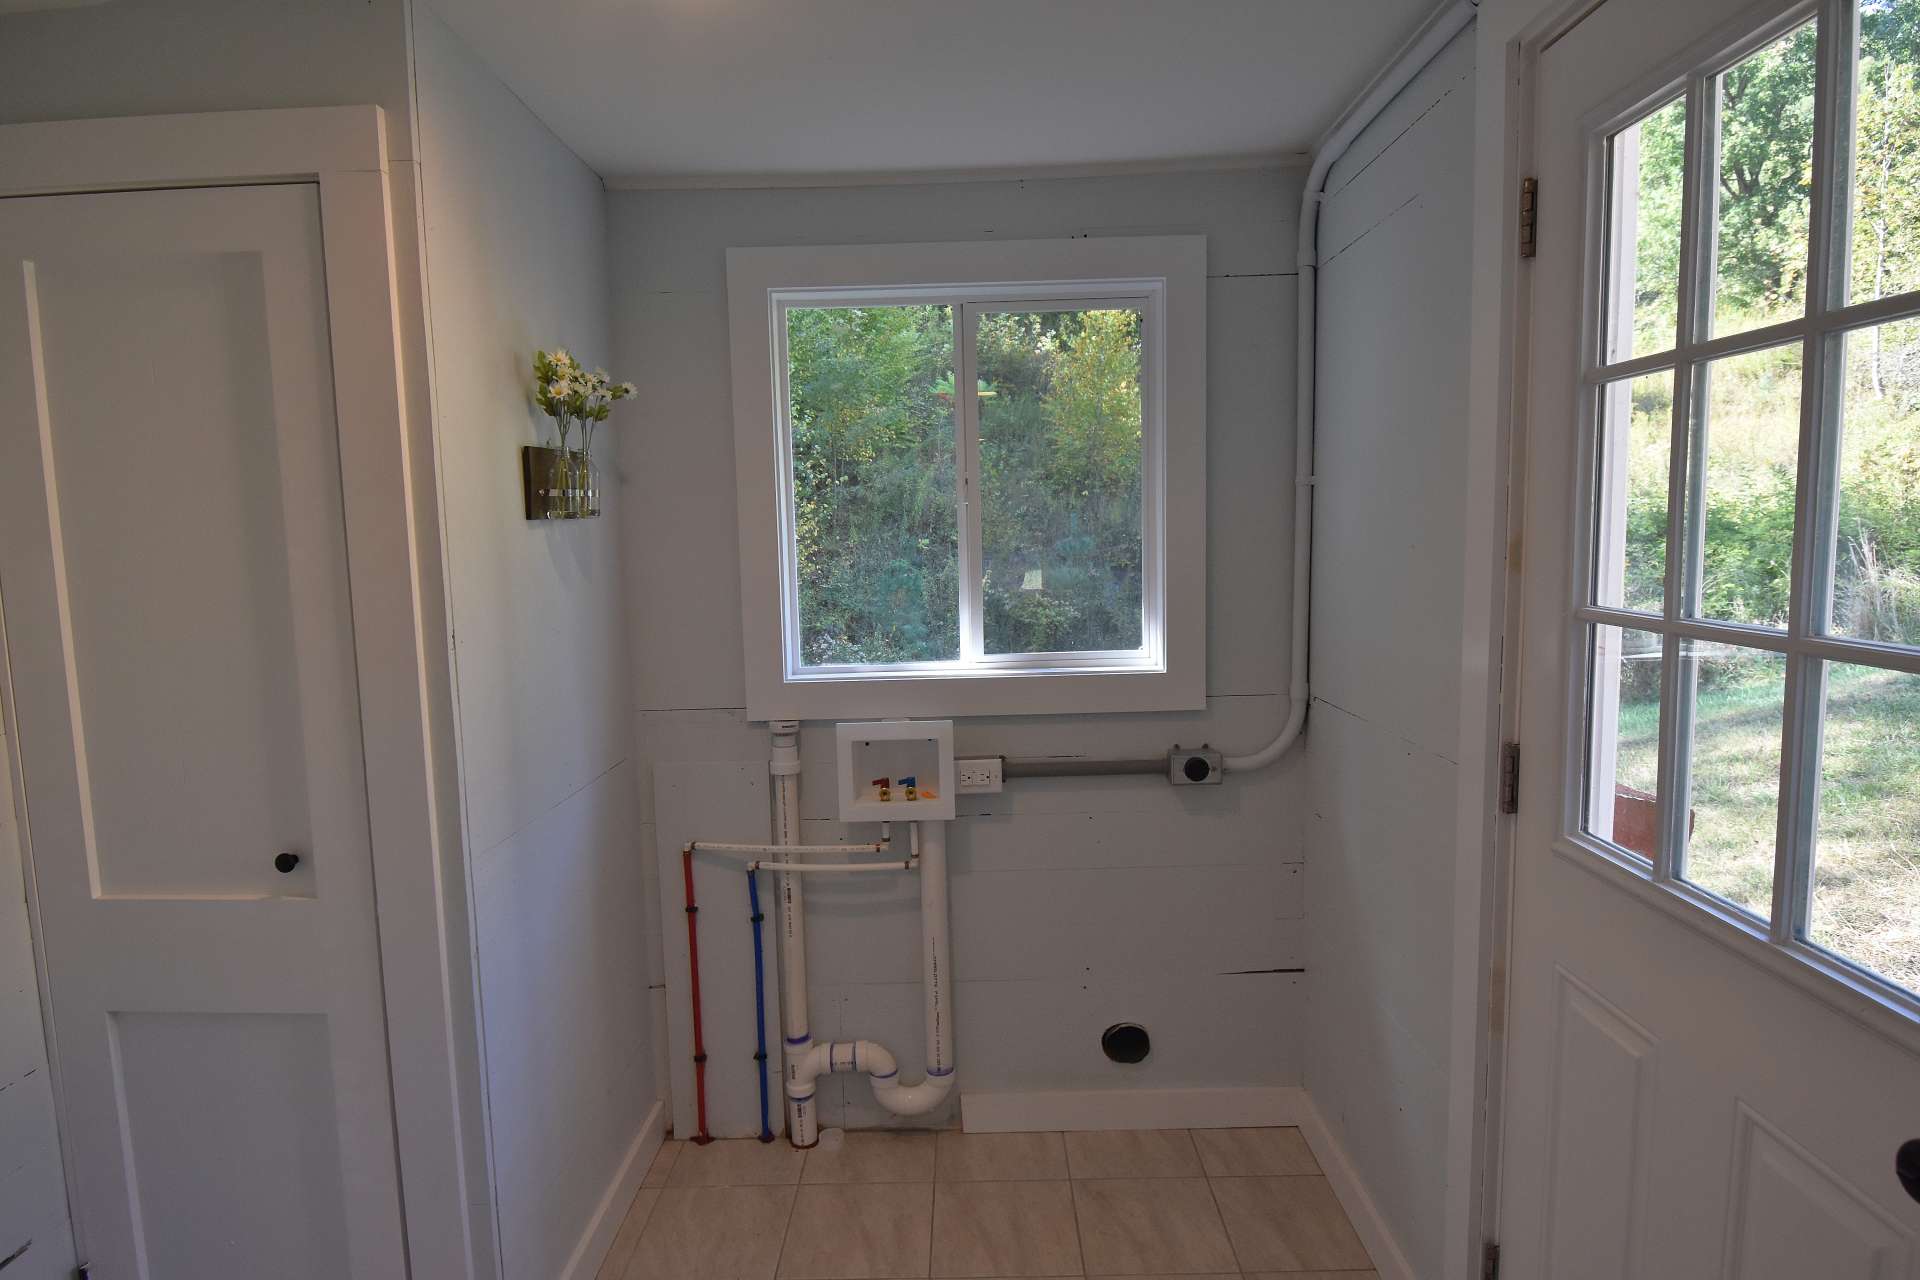 A laundry room is accessed from the kitchen and completes the updated floor plan.